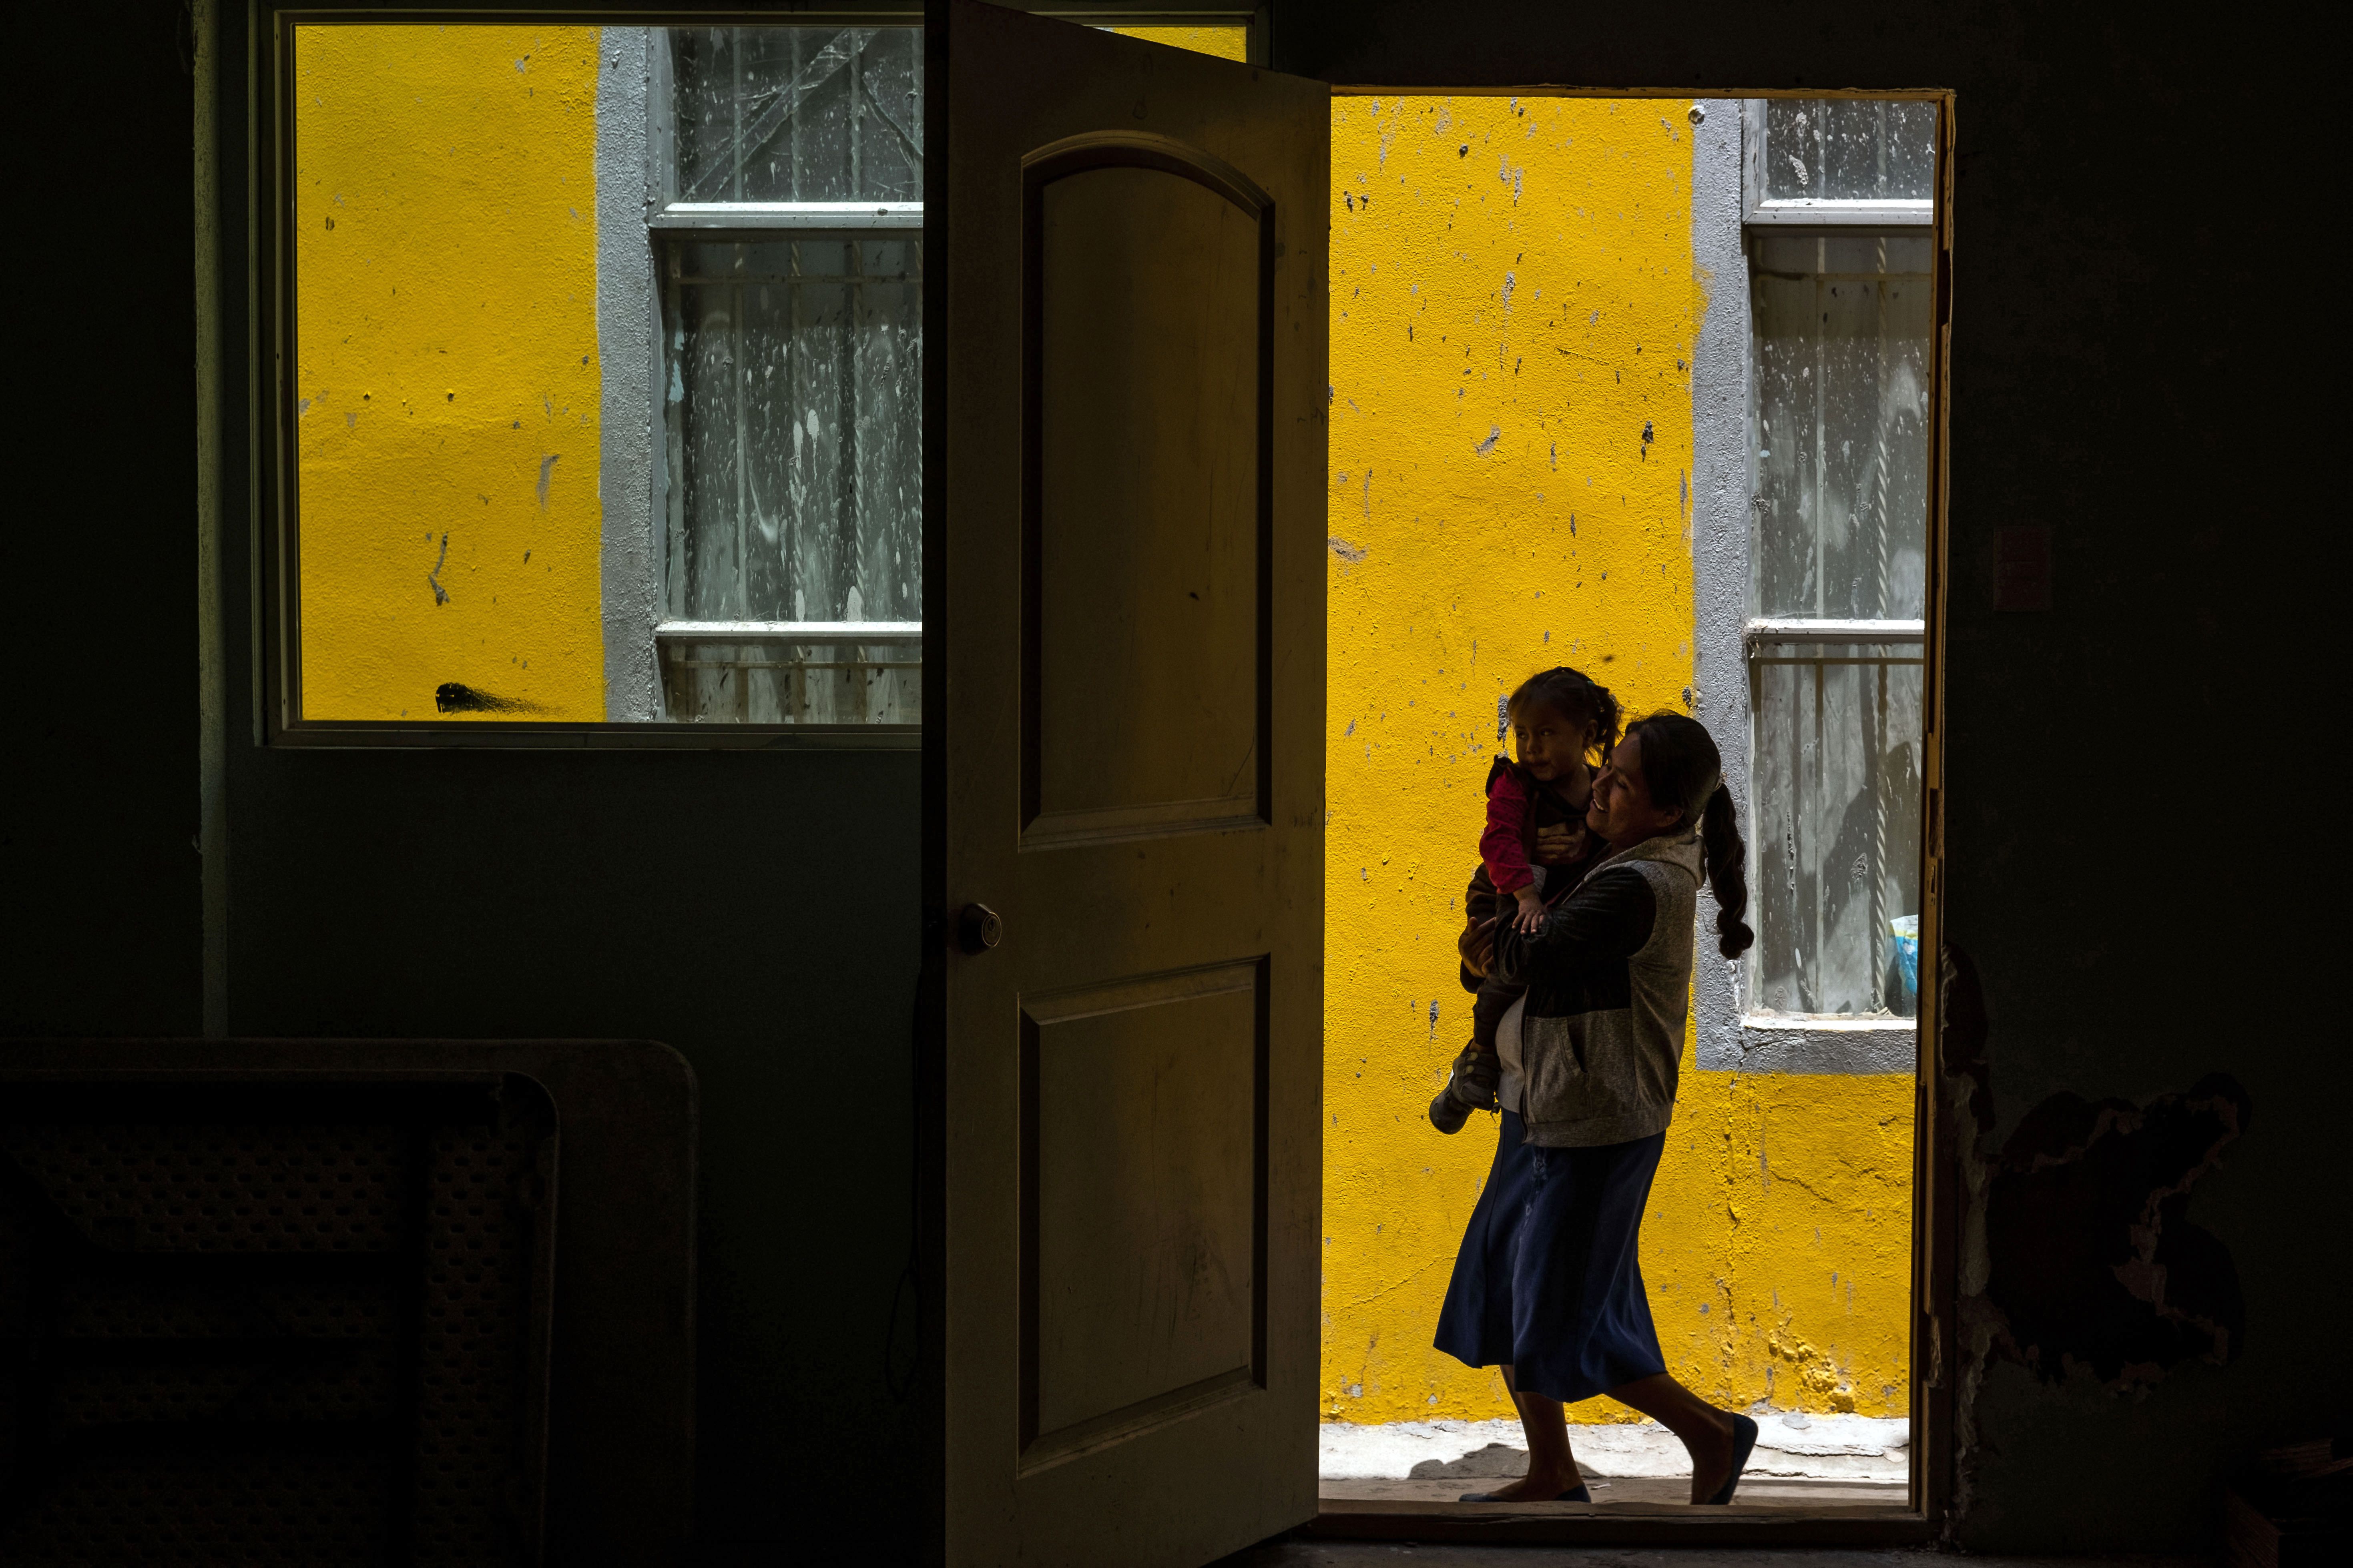 Migrant woman and child near AGAPE shelter in Tijuana, Mexico.